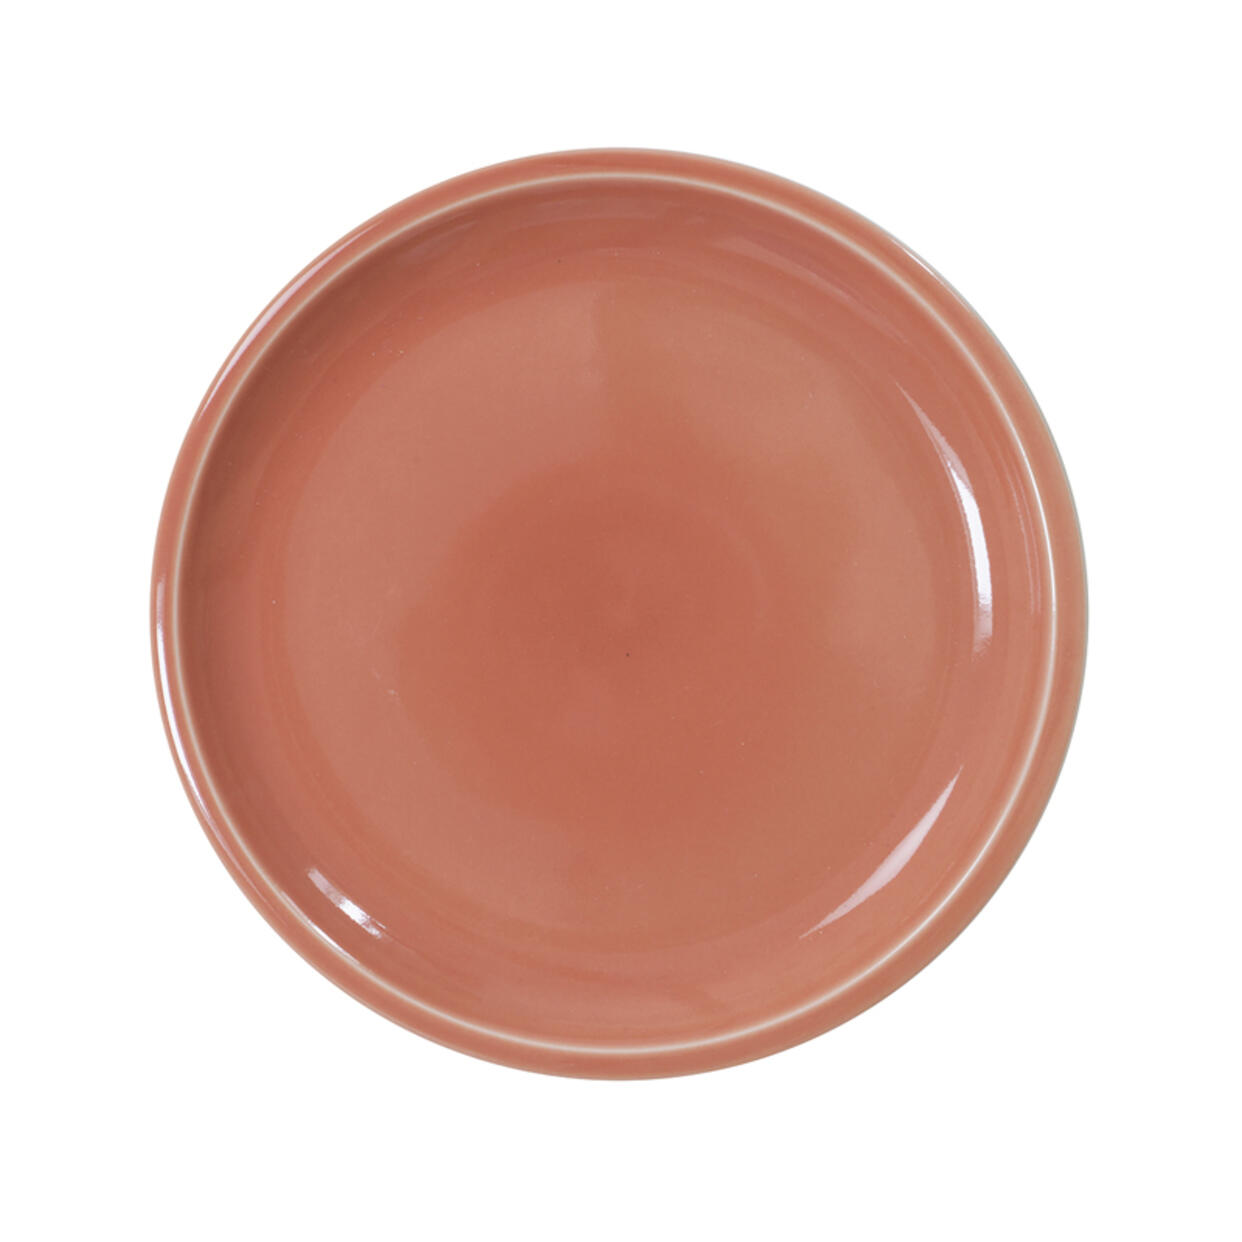 Plate L Cantine terre cuite, ceramic plate, top-of-the-range plate, french ceramic manufacturer